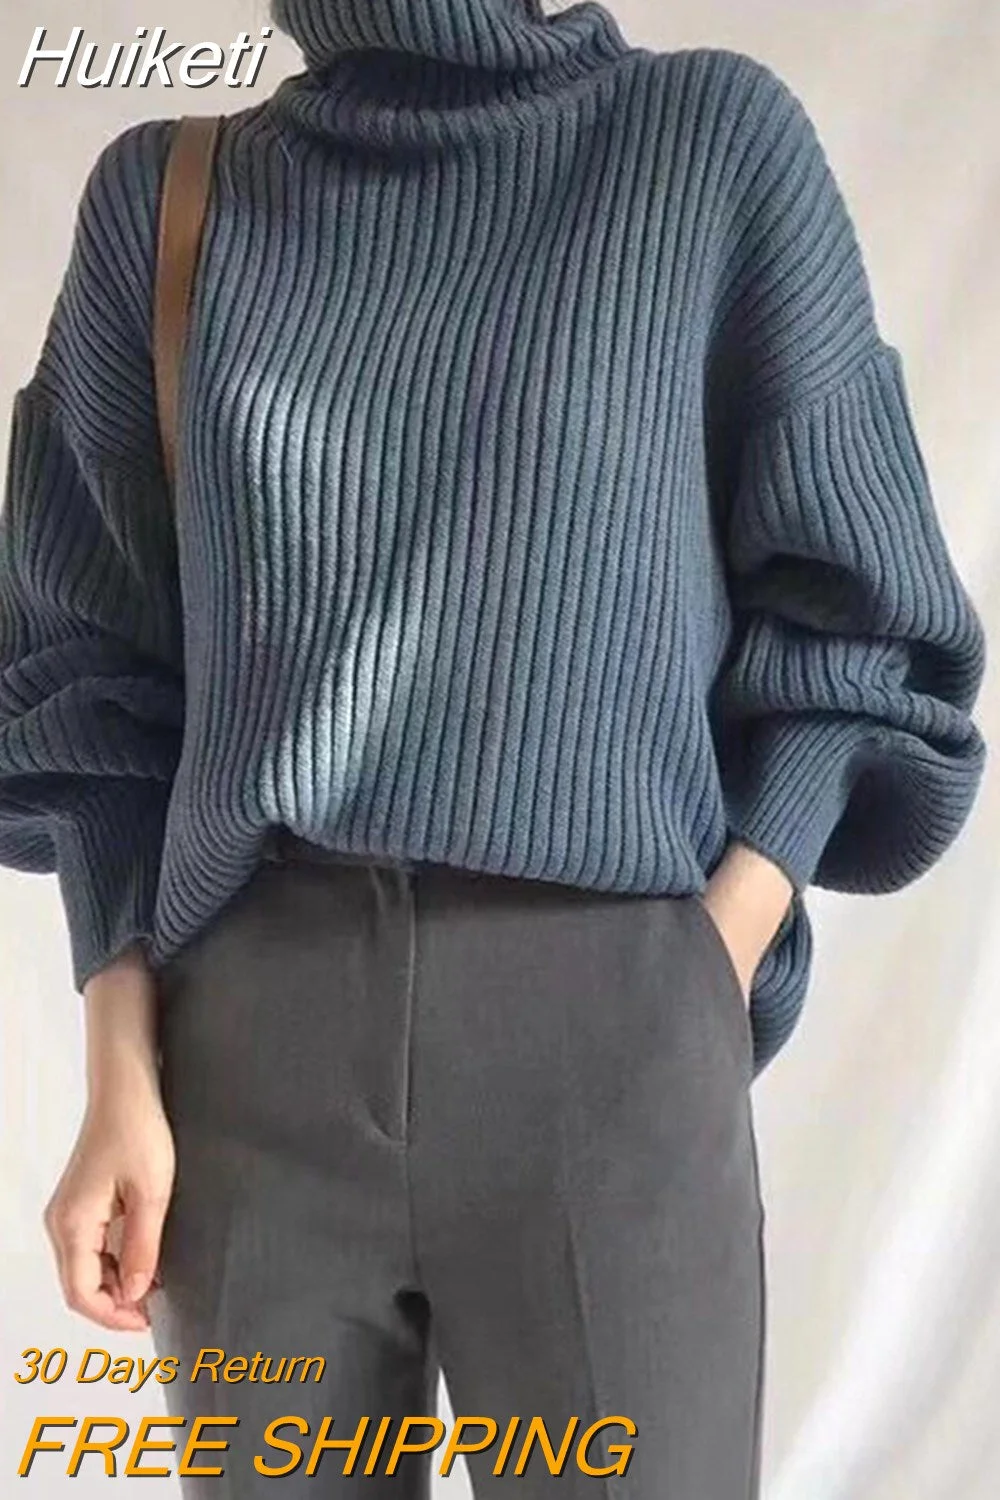 Huiketi Office Lady Elegant Turtleneck Sweaters Korean Fashion Lazy Wind Women Long Sleeve Knitted Pullovers Solid Vintage Jumpers